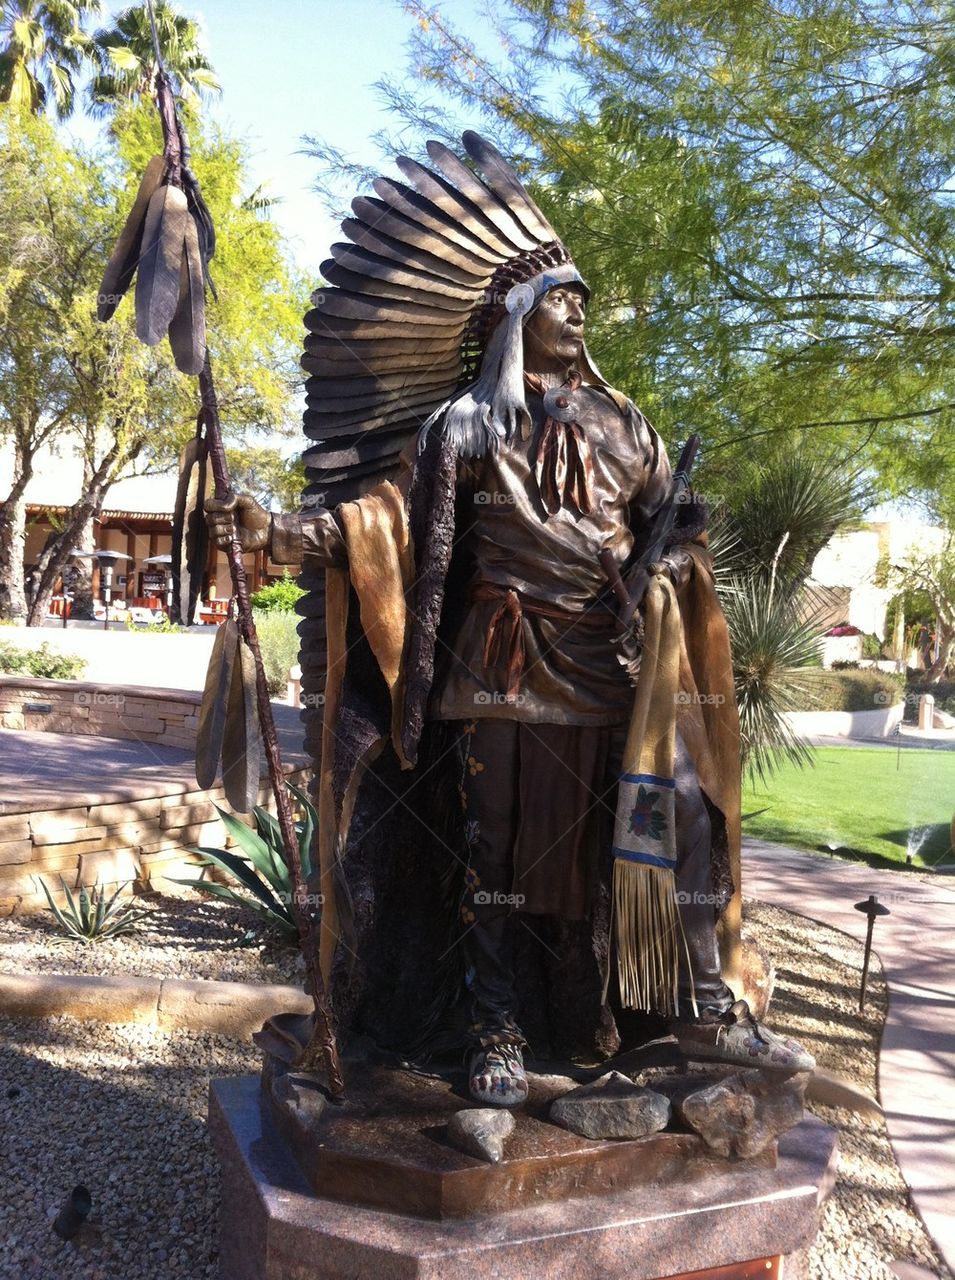 Native American , Cheif, feathers, spear, leather. Desert, great native nations